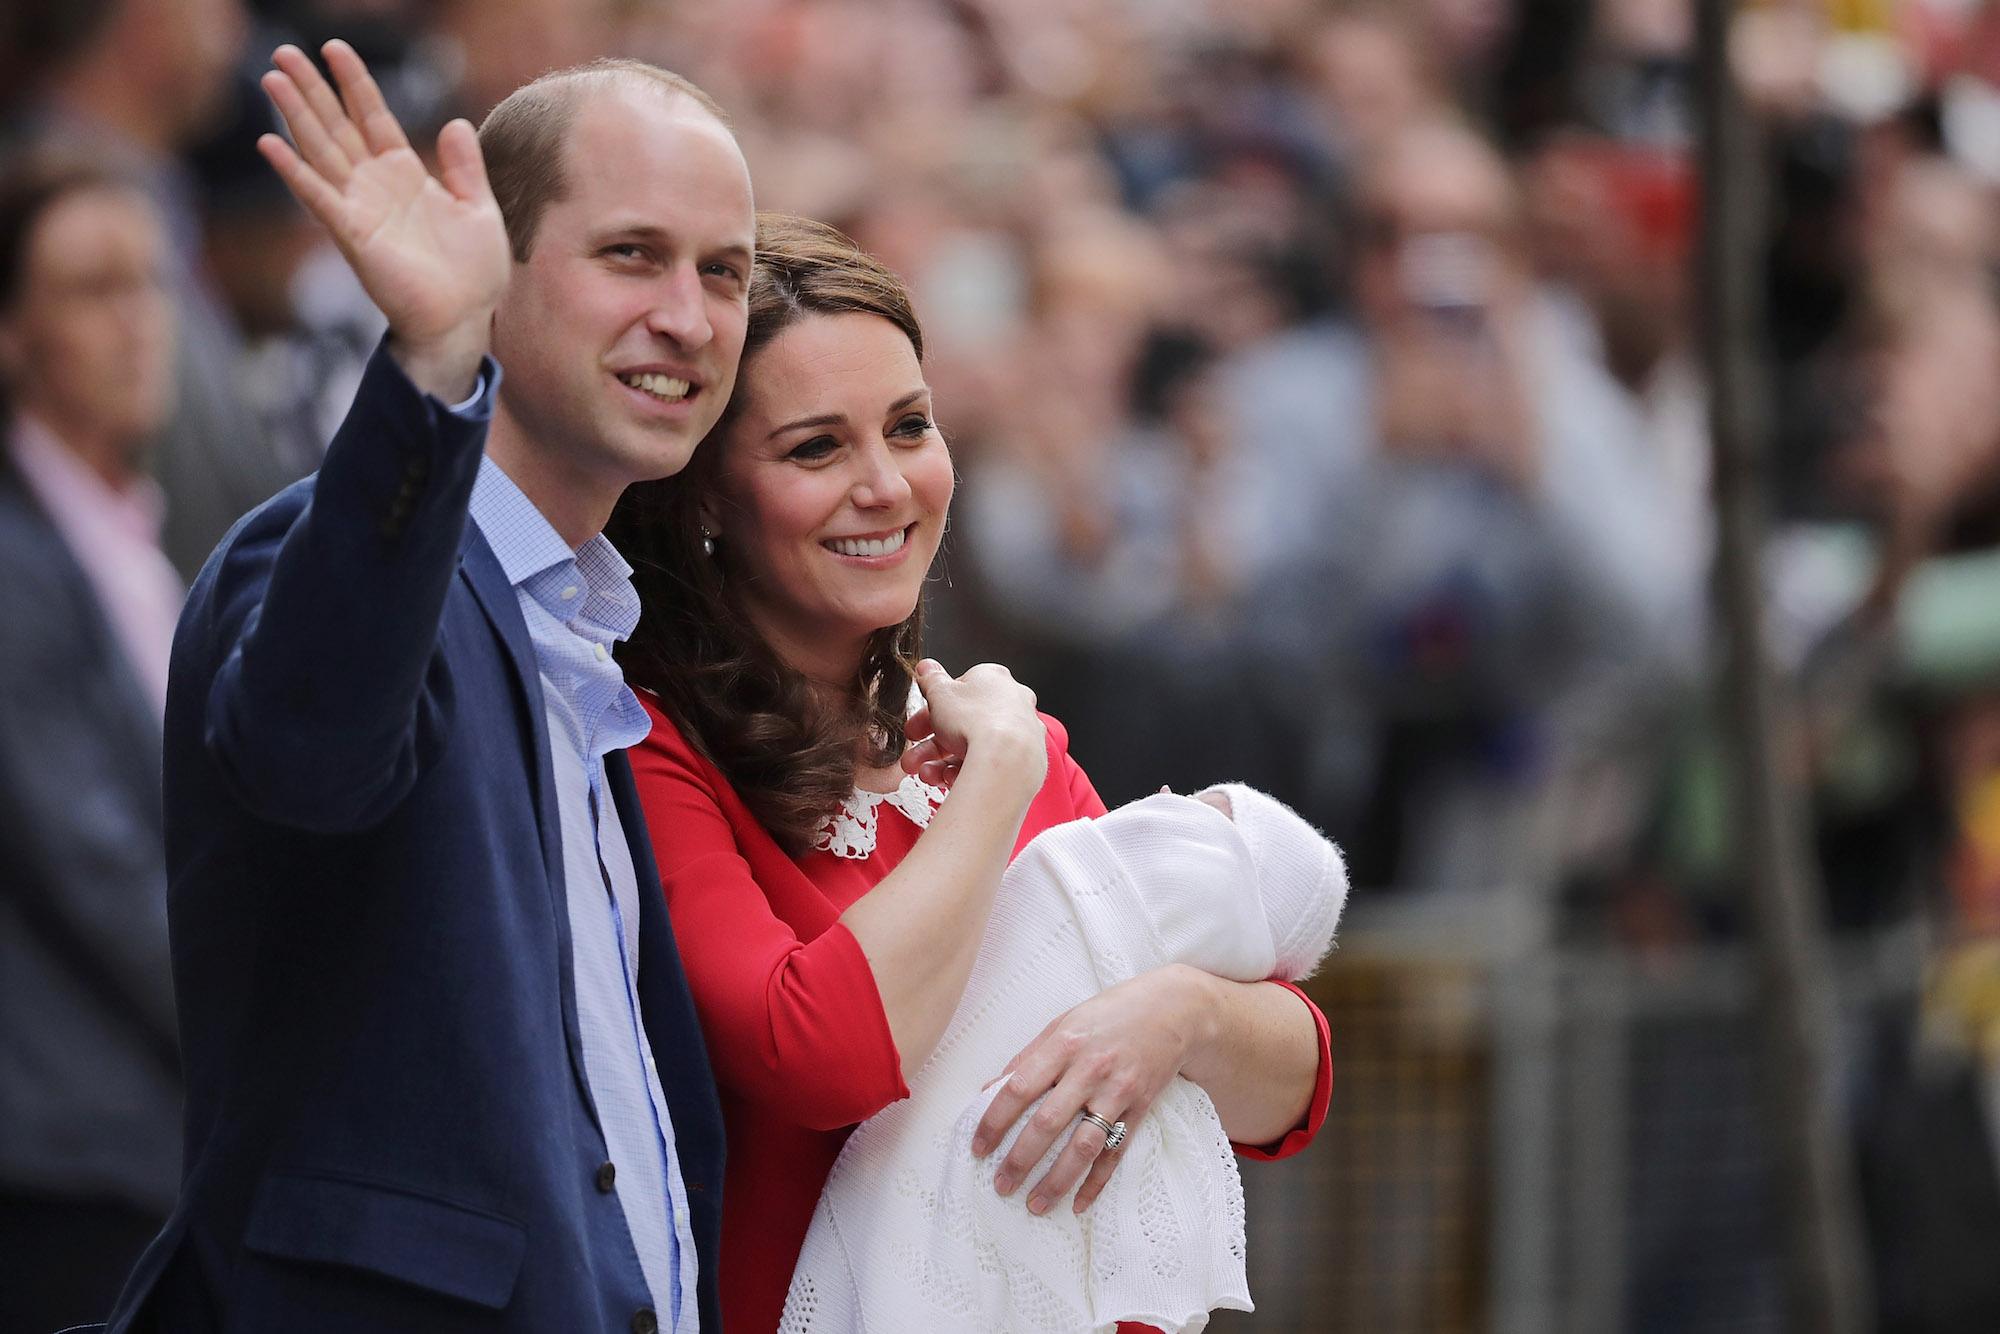 Prince William and Kate Middleton leave the hospital with Prince Louis